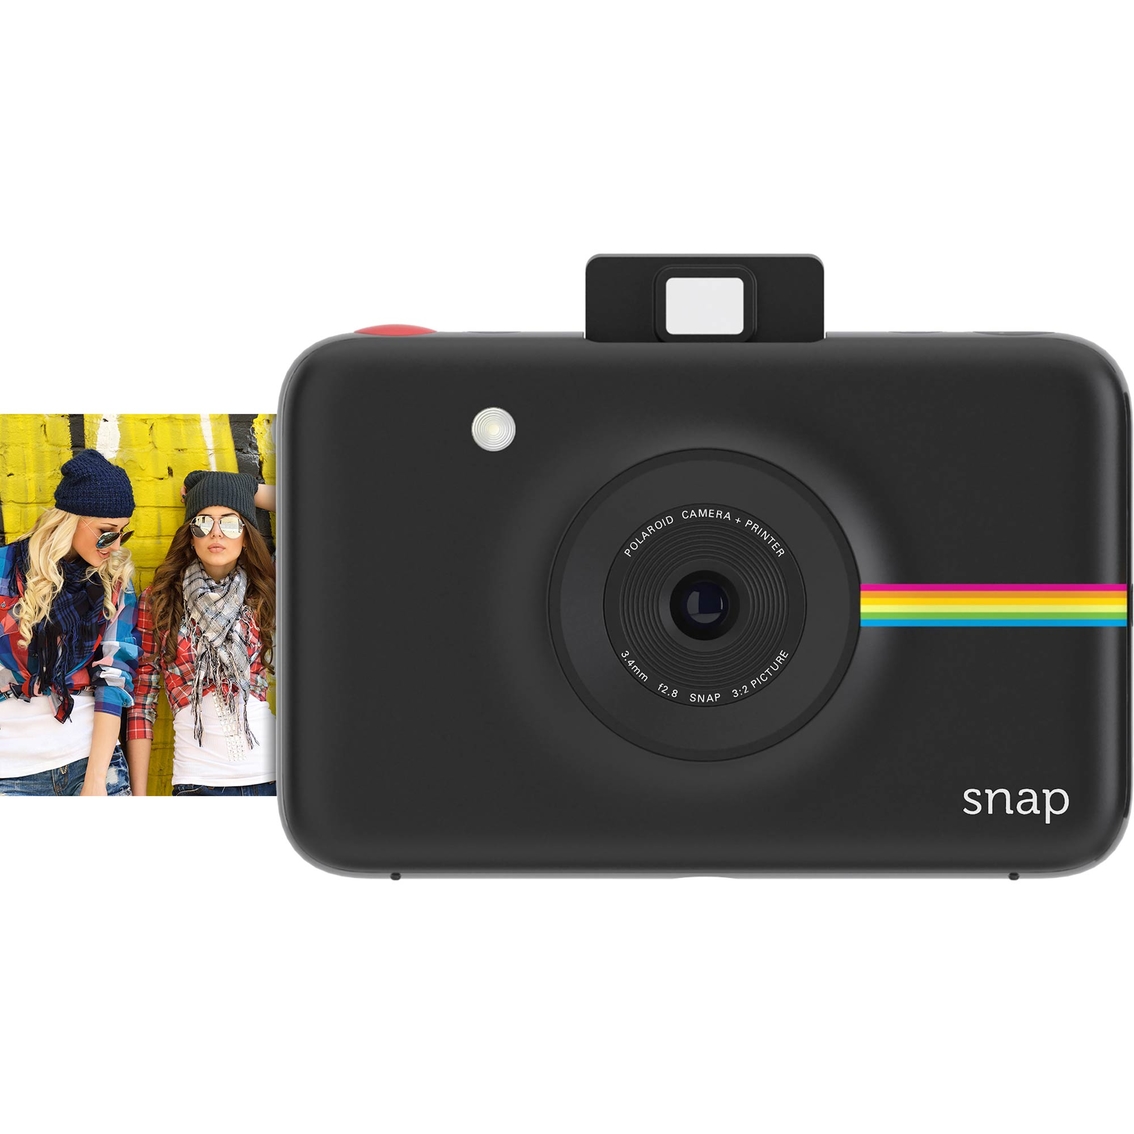 Polaroid Snap Instant Digital Camera with ZINK Zero Ink Printing Technology - Image 4 of 4